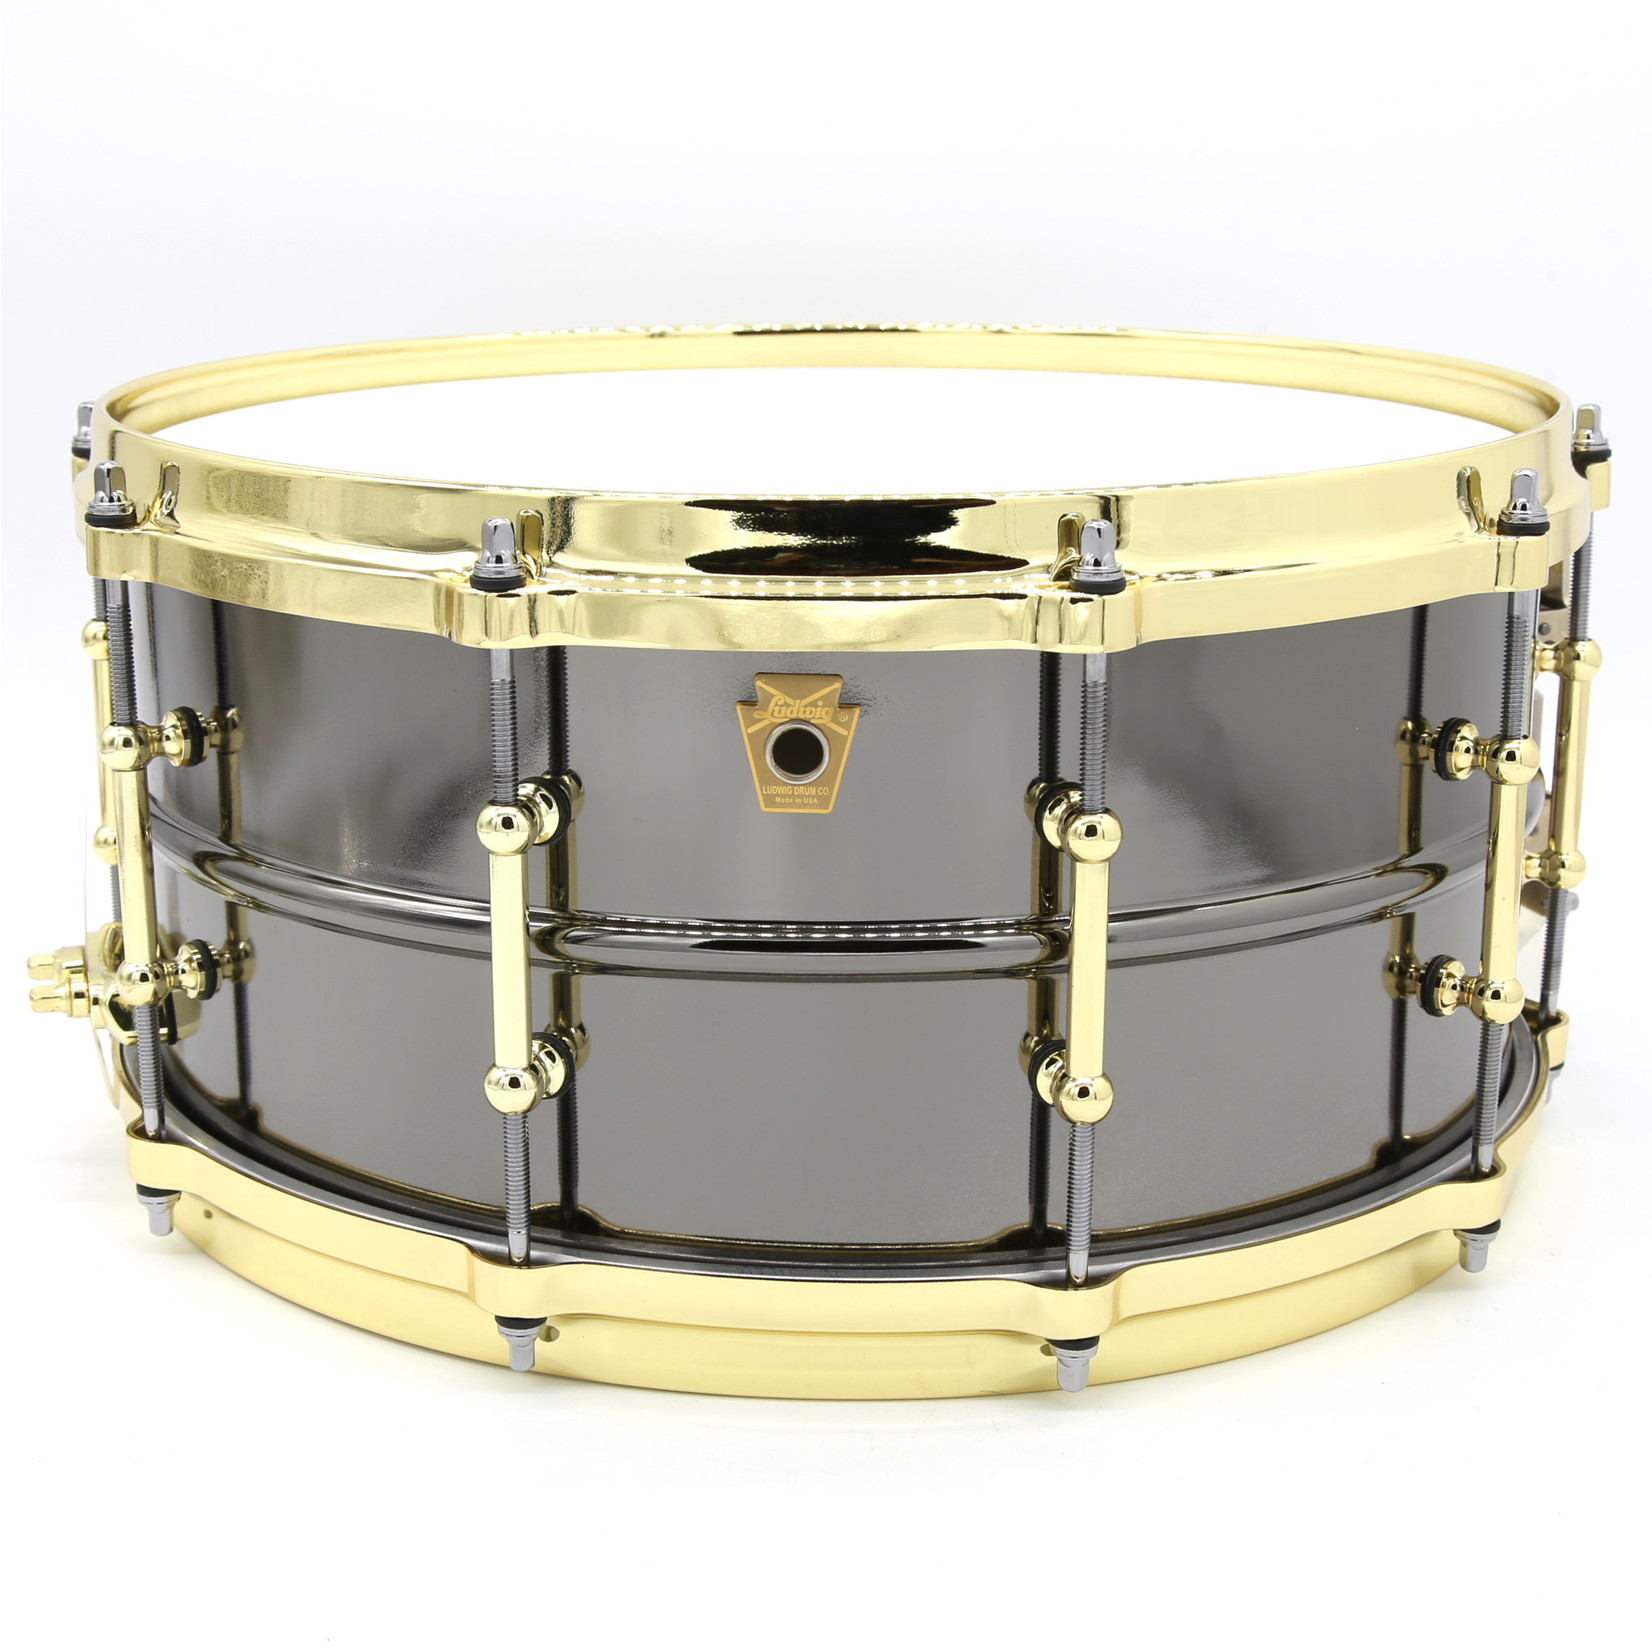 Ludwig Ludwig 6.5x14" Black Beauty Snare Drum Diecast Hoops With Tube Lugs LB417BT